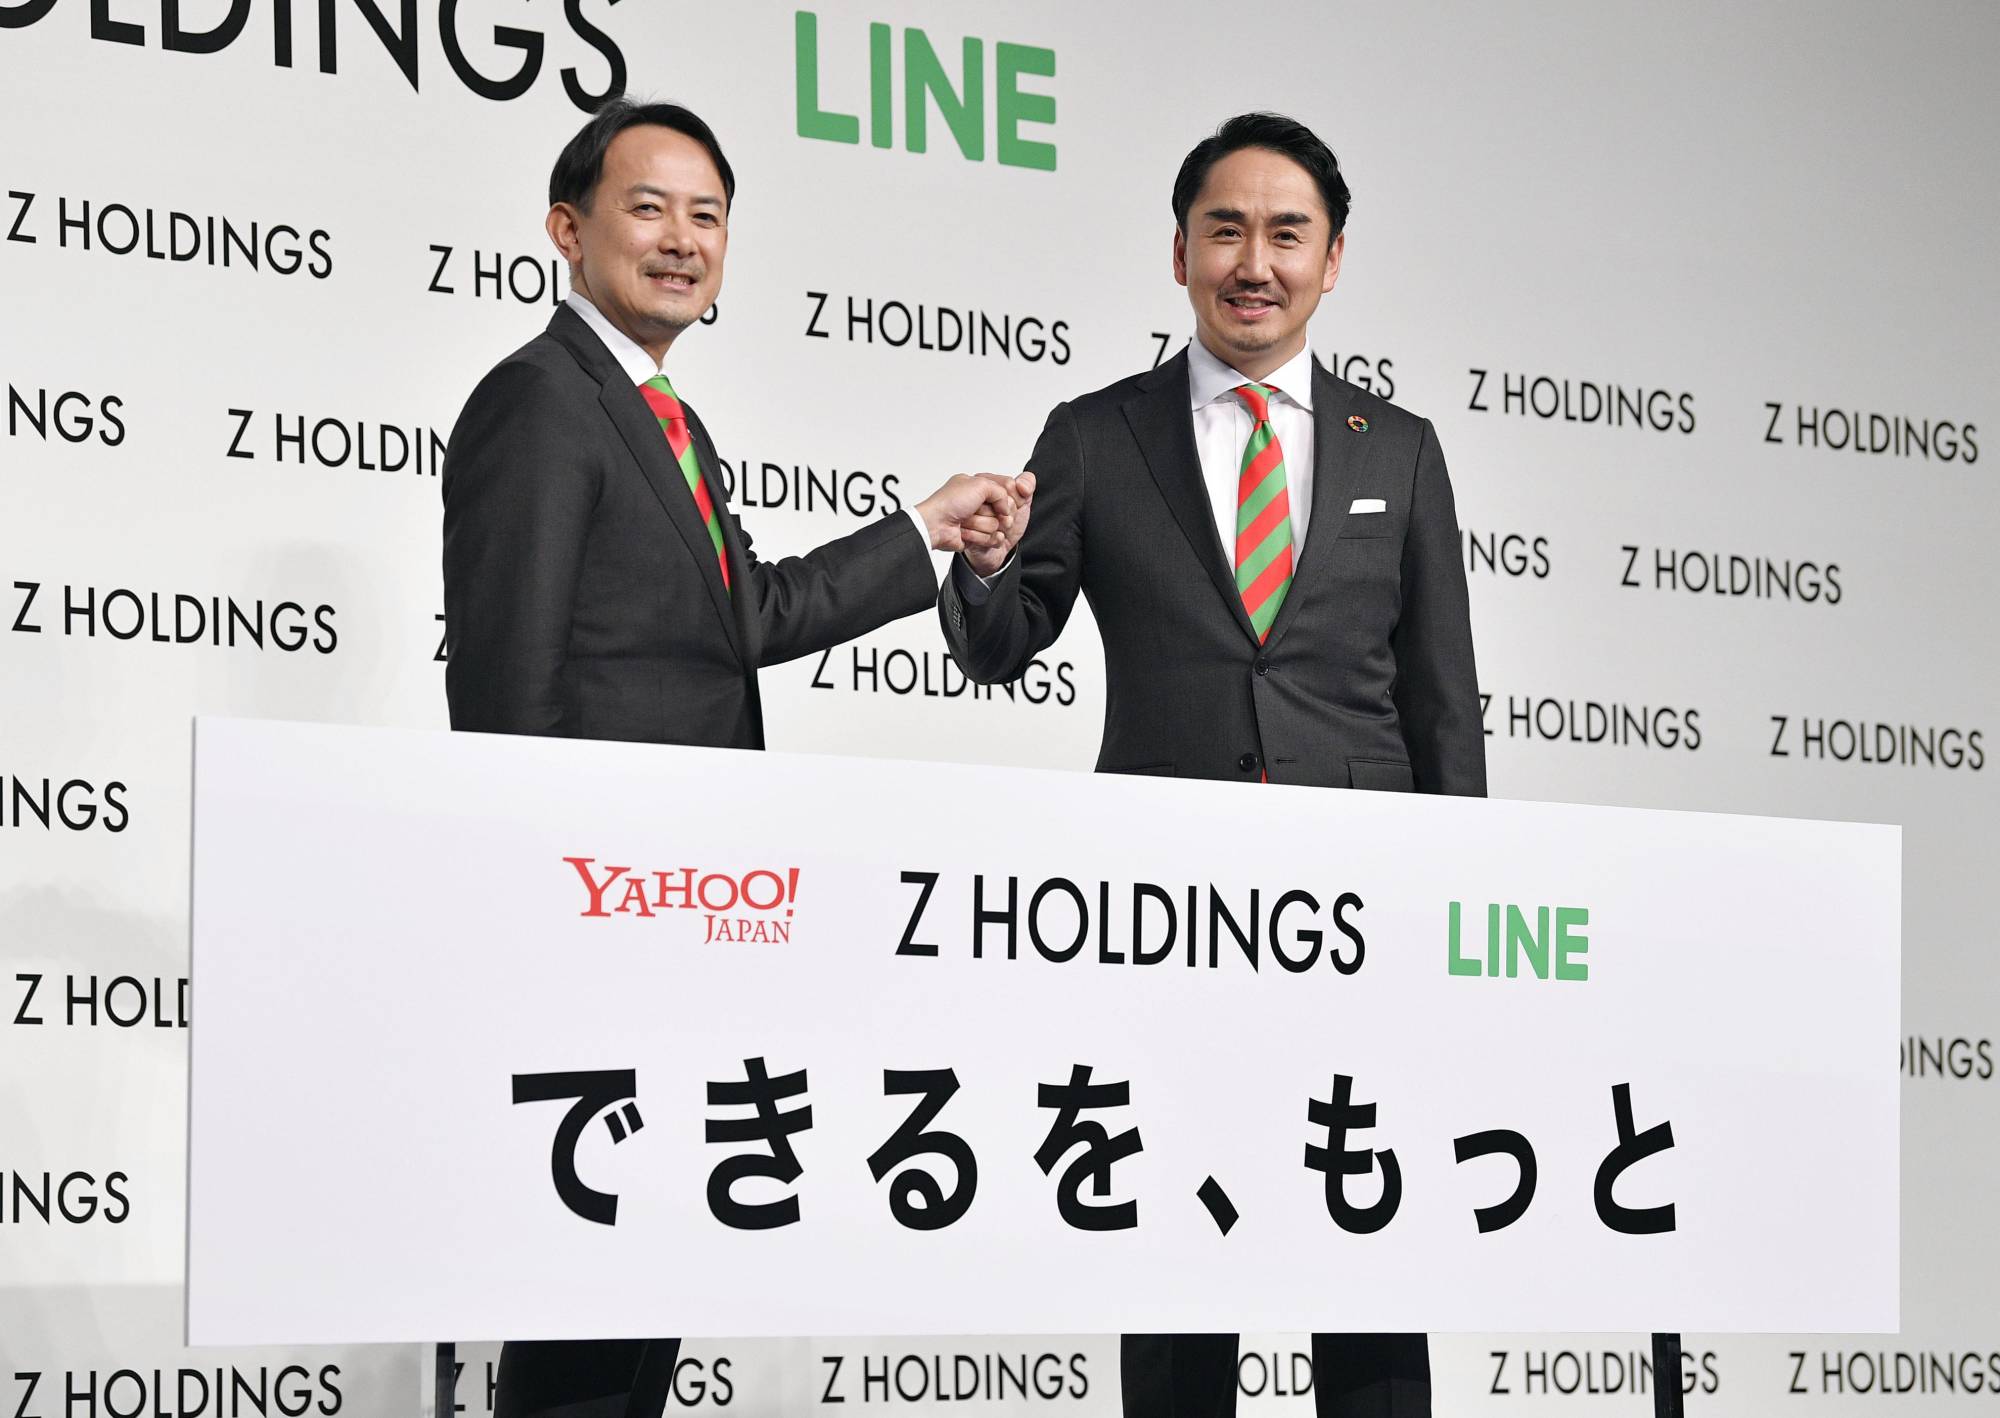 Kentaro Kawabe (left), president of Yahoo Japan operator Z Holdings Corp., and Line Corp. President Takeshi Idezawa hold a news conference in Tokyo on Monday. | KYODO